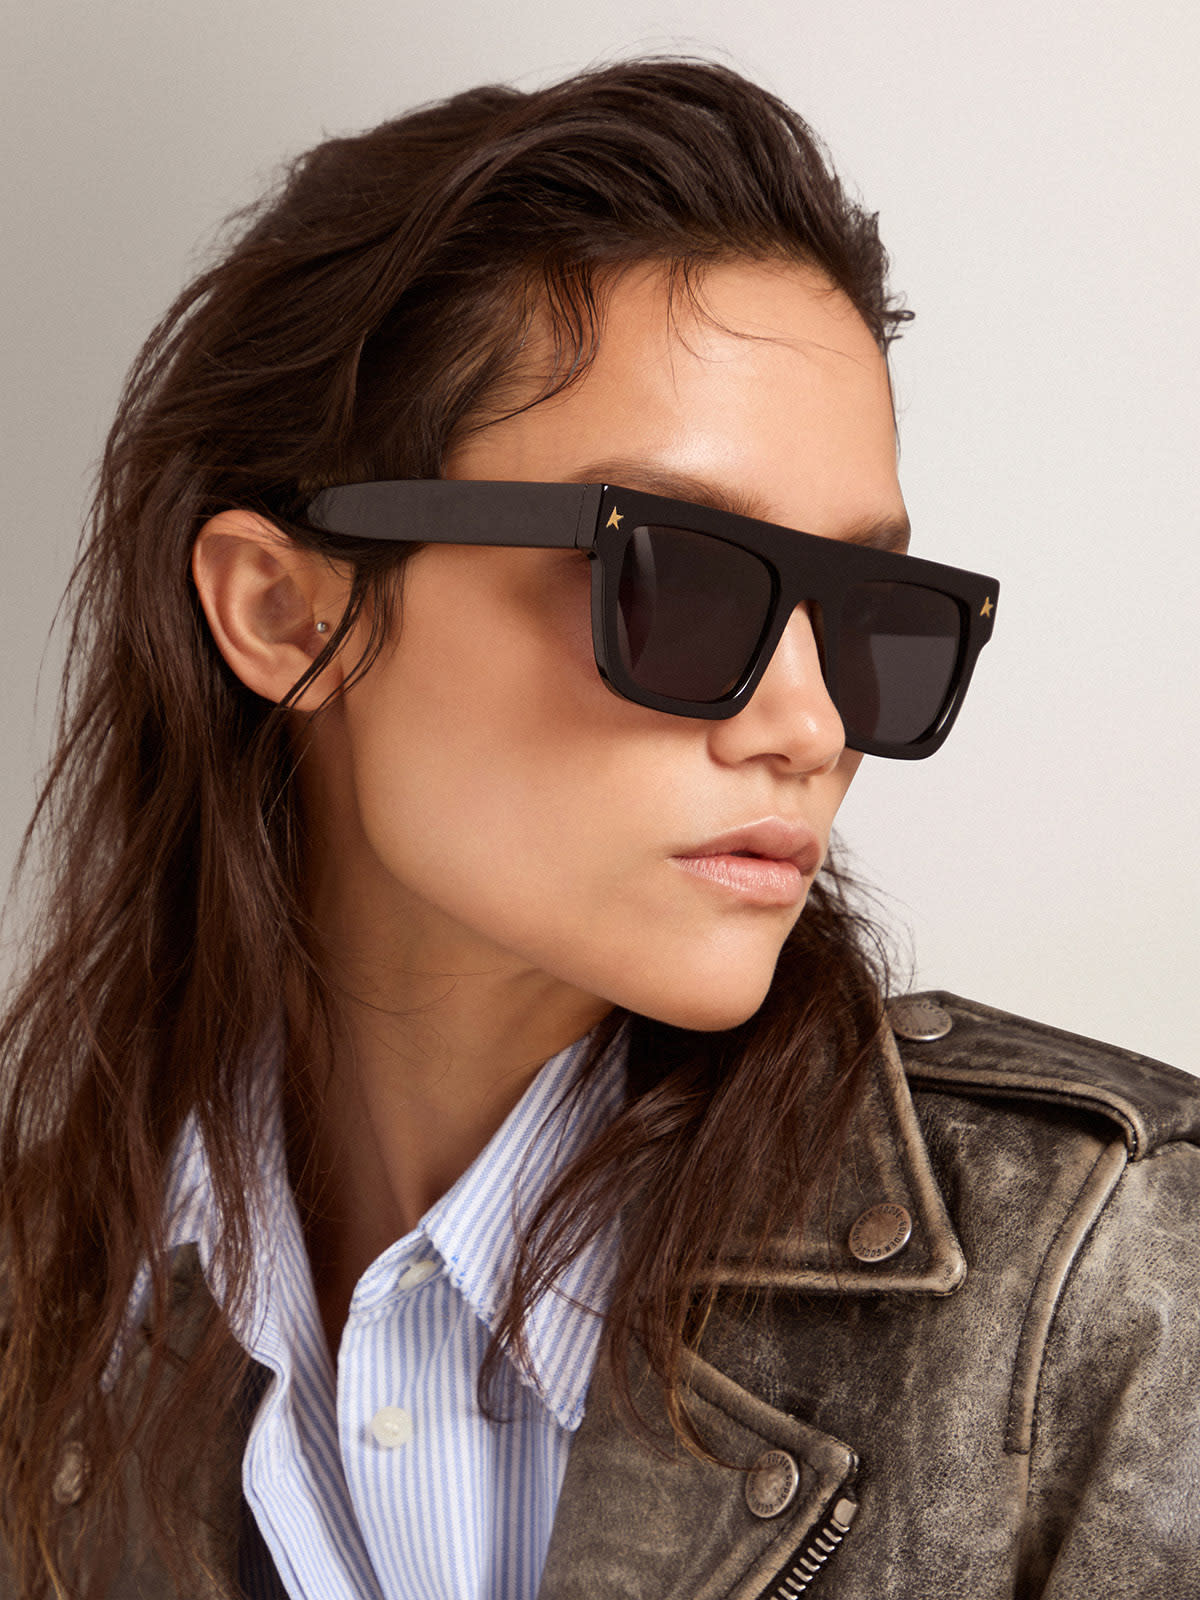 Golden Goose - Square sunglasses with black frame and gold details in 